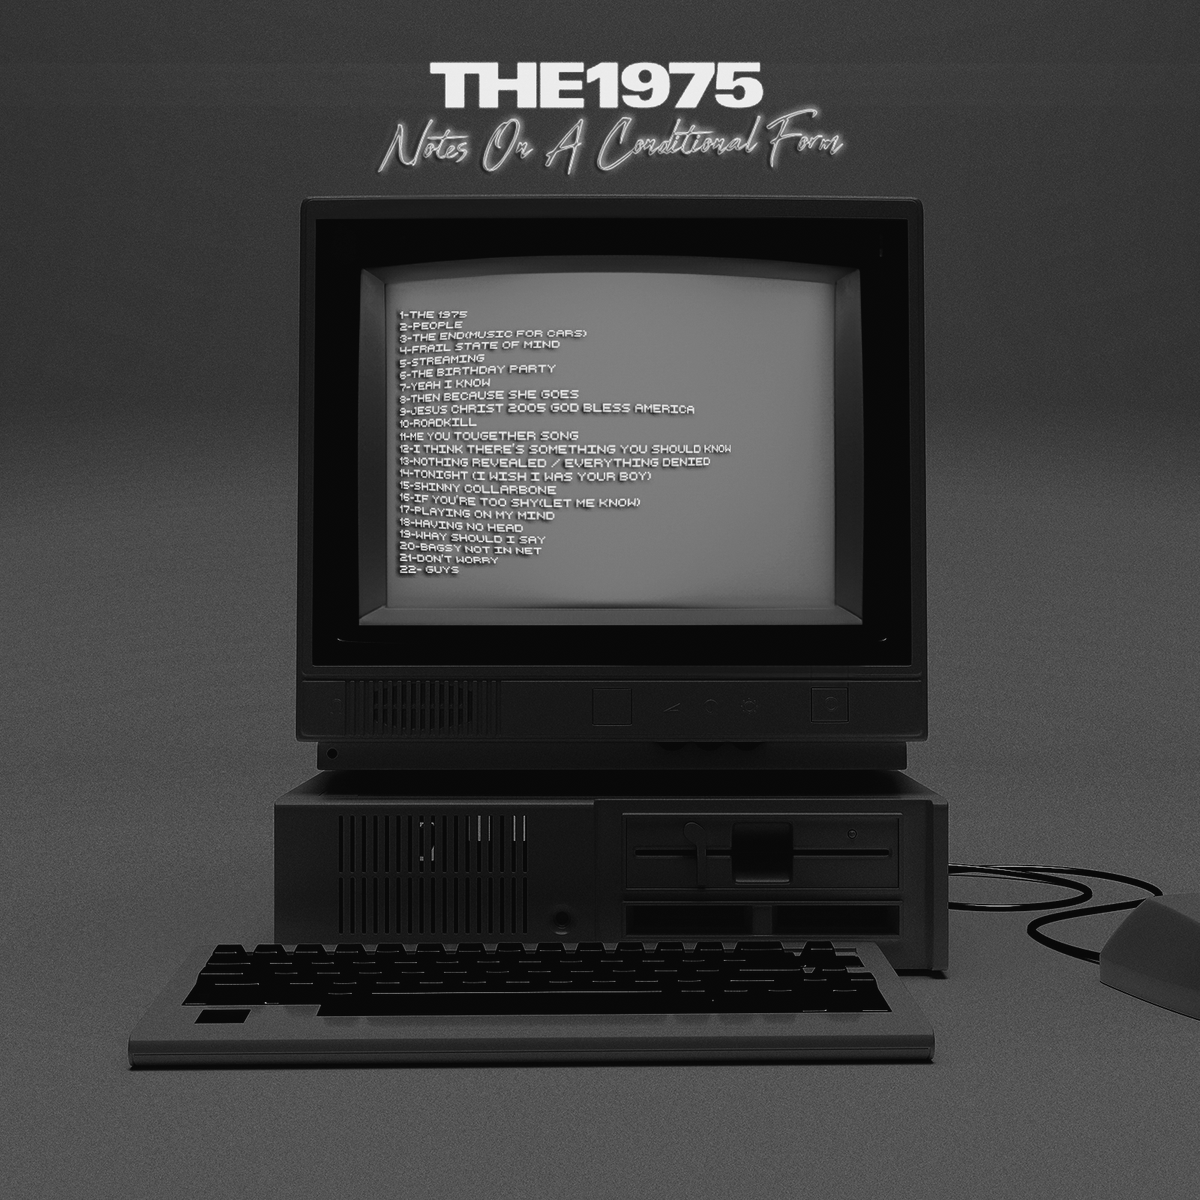 Cover art for @the1975 noacf album

#coverart #the1975 #graphicdesign #photoshopartwork